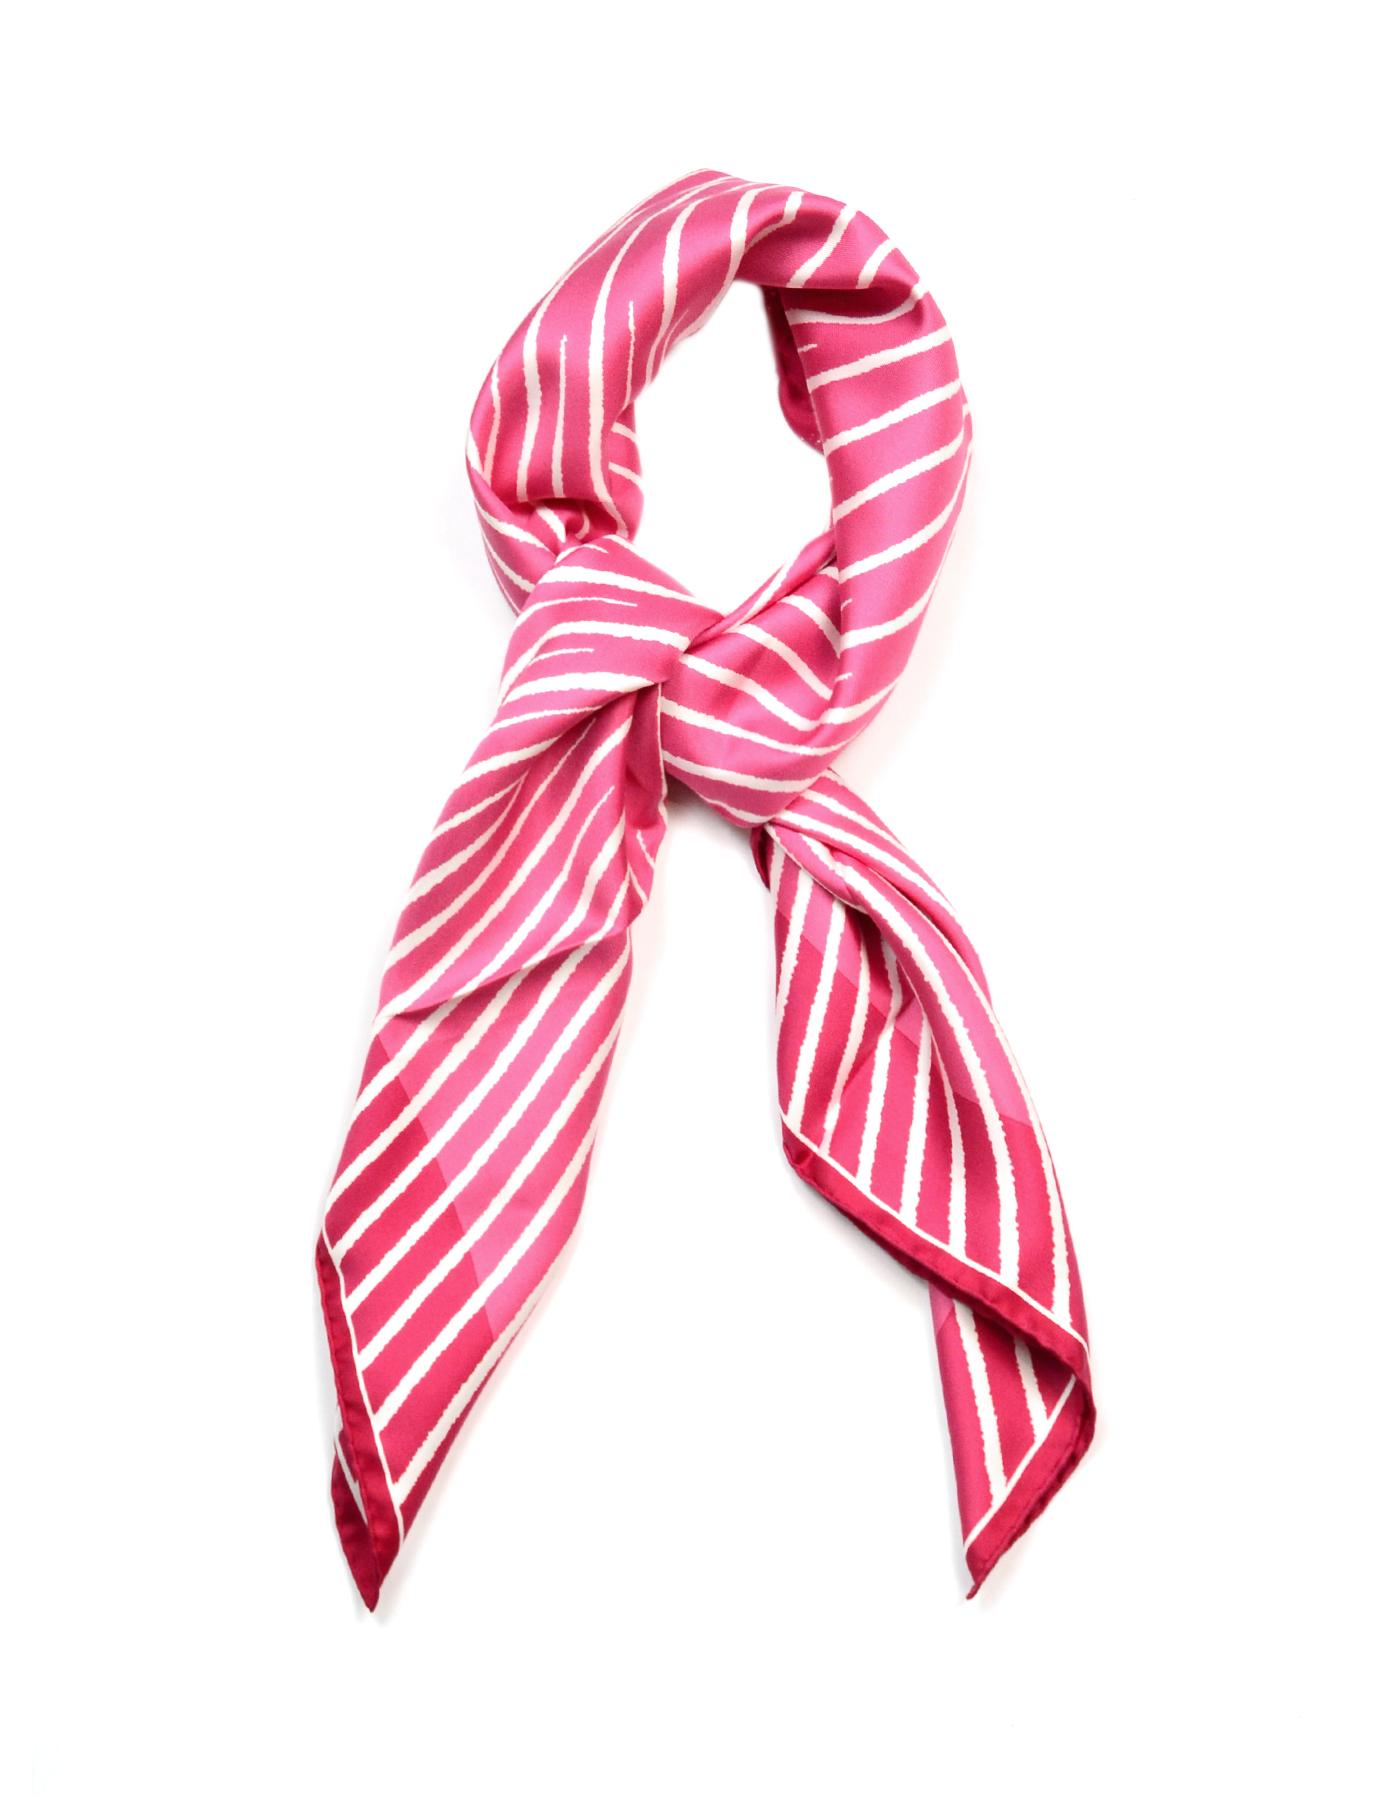 Hermes Pink/White Striped Starburst 90cm Silk Scarf

Made In: France
Color: Pink/white
Materials: 100% silk
Overall Condition: Excellent pre-owned condition 
Includes: Hermes box and ribbon

Measurements: 90cm
35